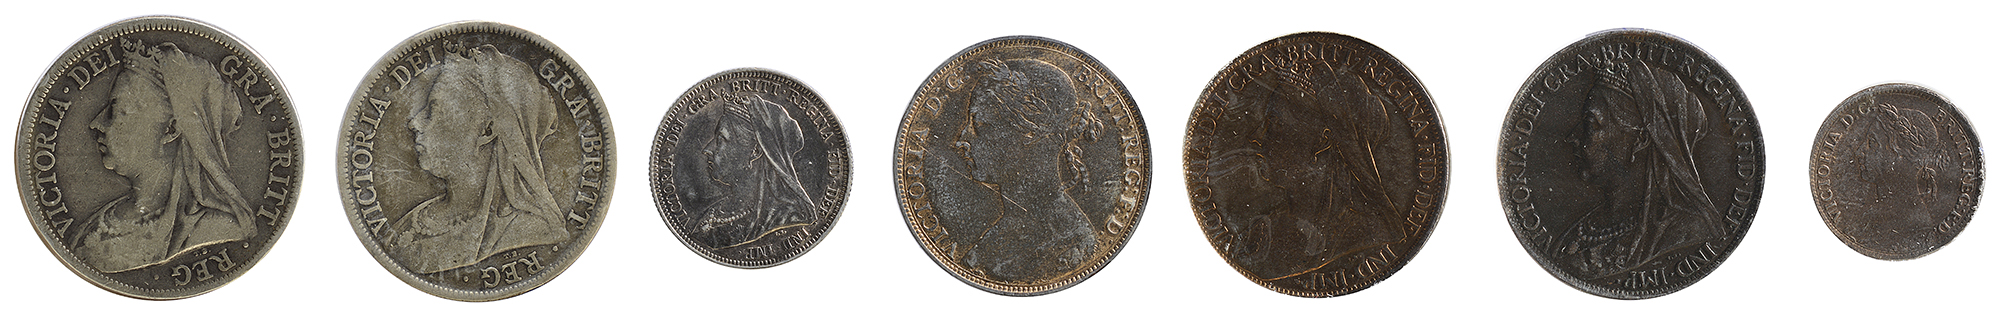 Queen Victoria Silver Halfcrown1897Veiled 'old head', left / Crowned and quartered shield, within